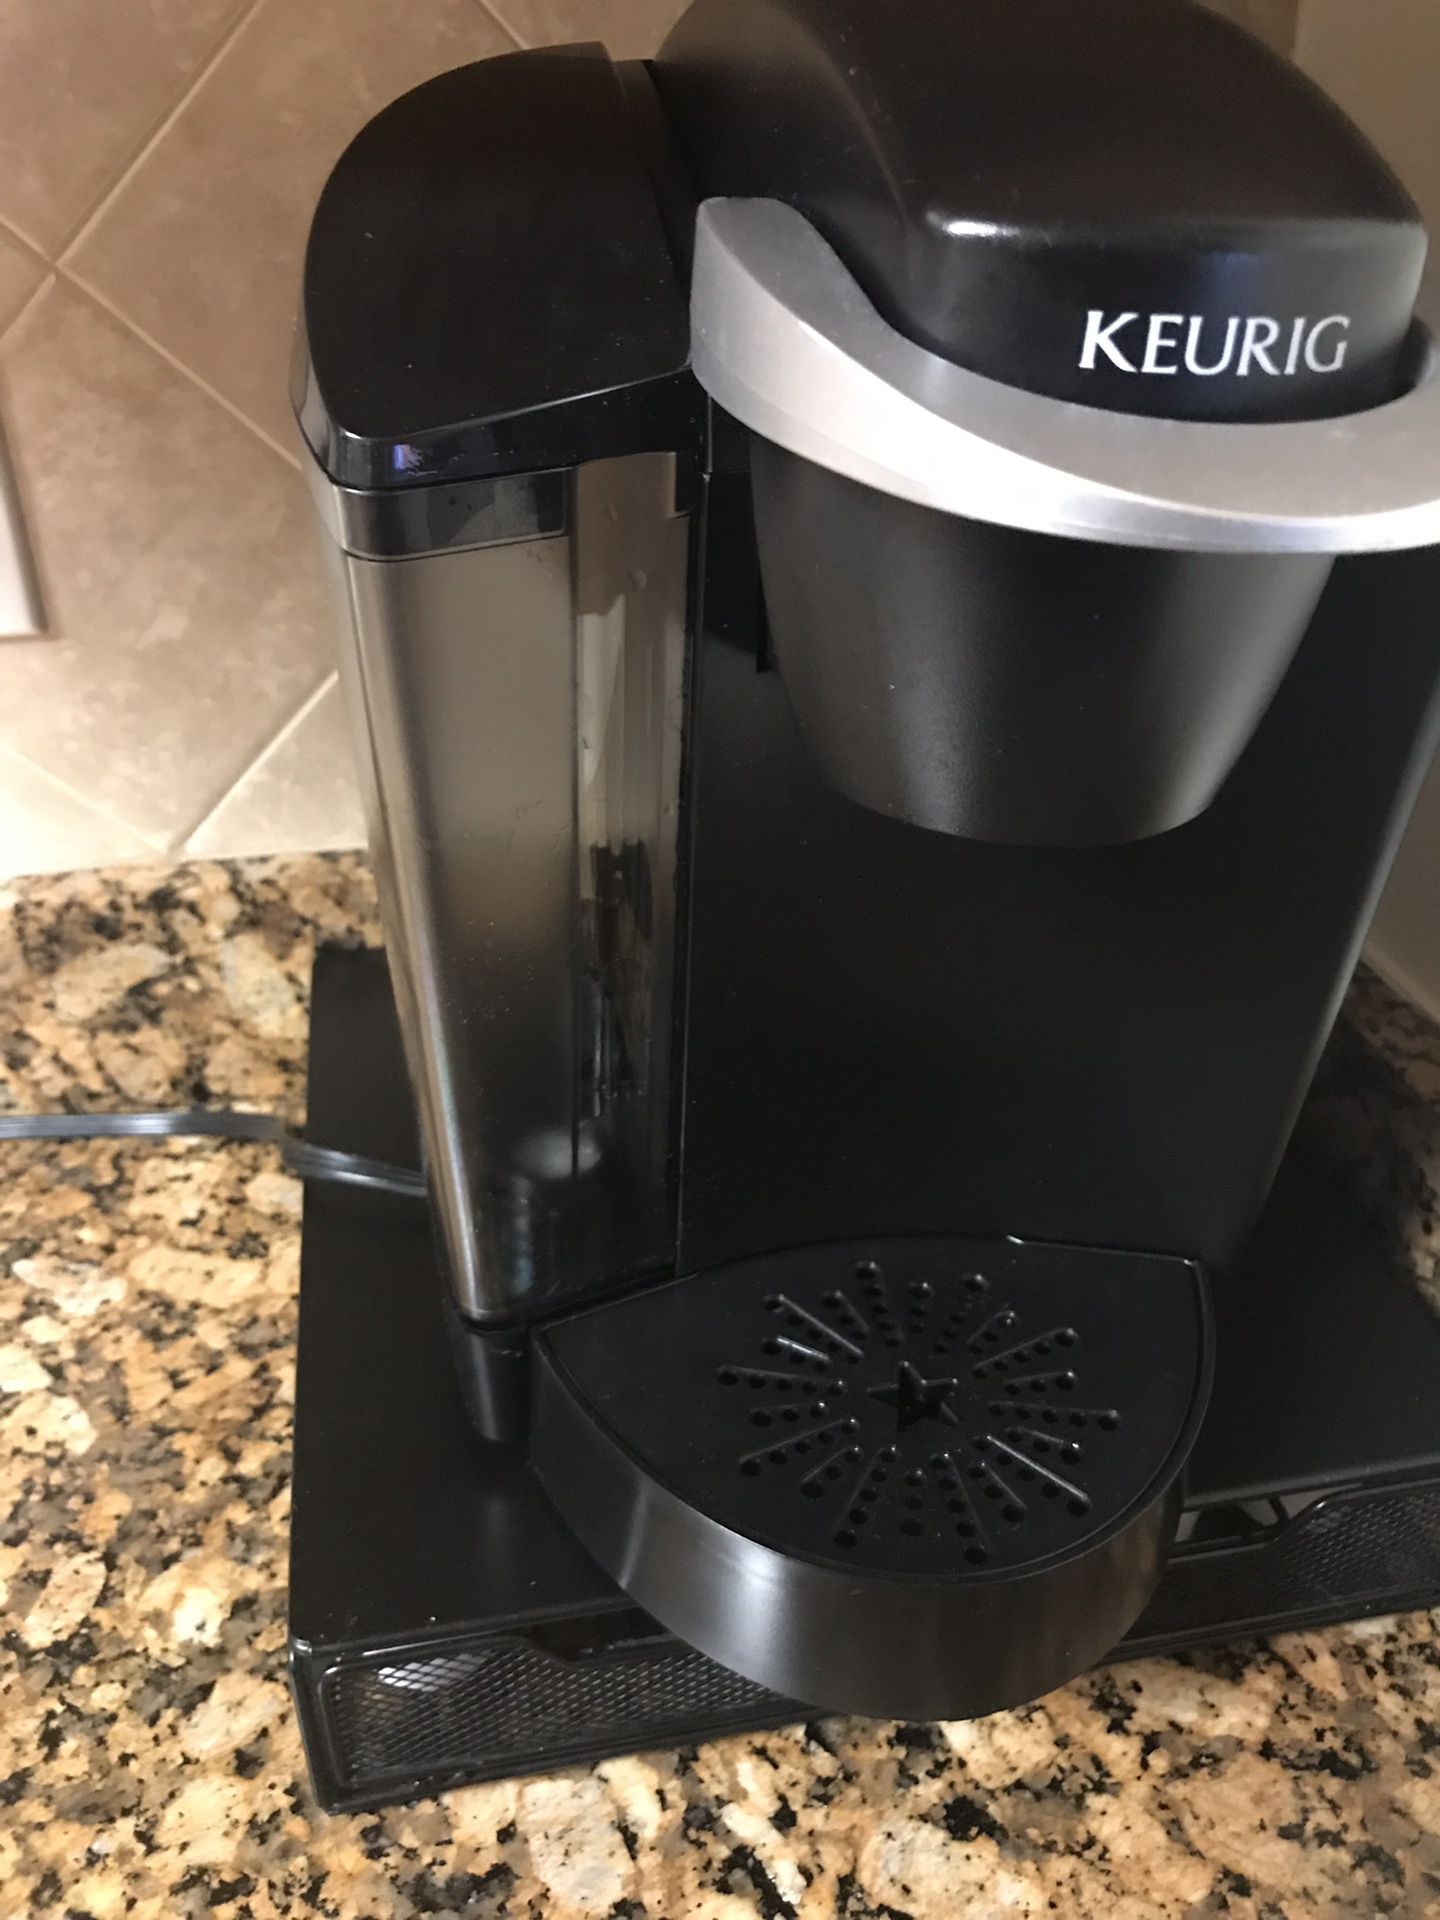 HARDLY EVER USED Keurig machine with stand